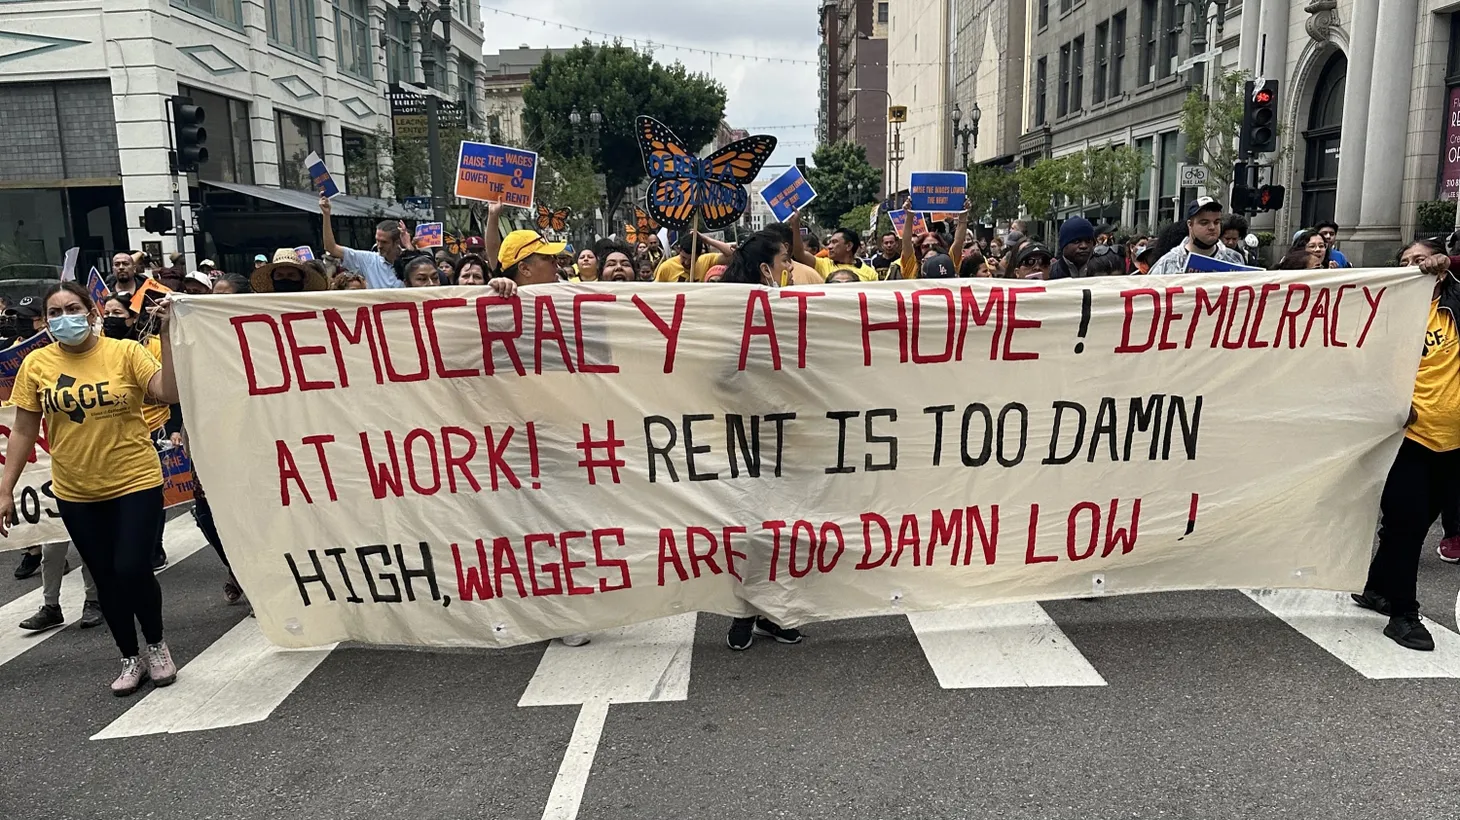 Tenants, labor unions, and allies marched in Downtown LA on Sept. 30 to protest high rents and low wages. Photo courtesy of Estuardo Mazariegos, Sylvia Moore, and The Alliance of Californians for Community Empowerment.